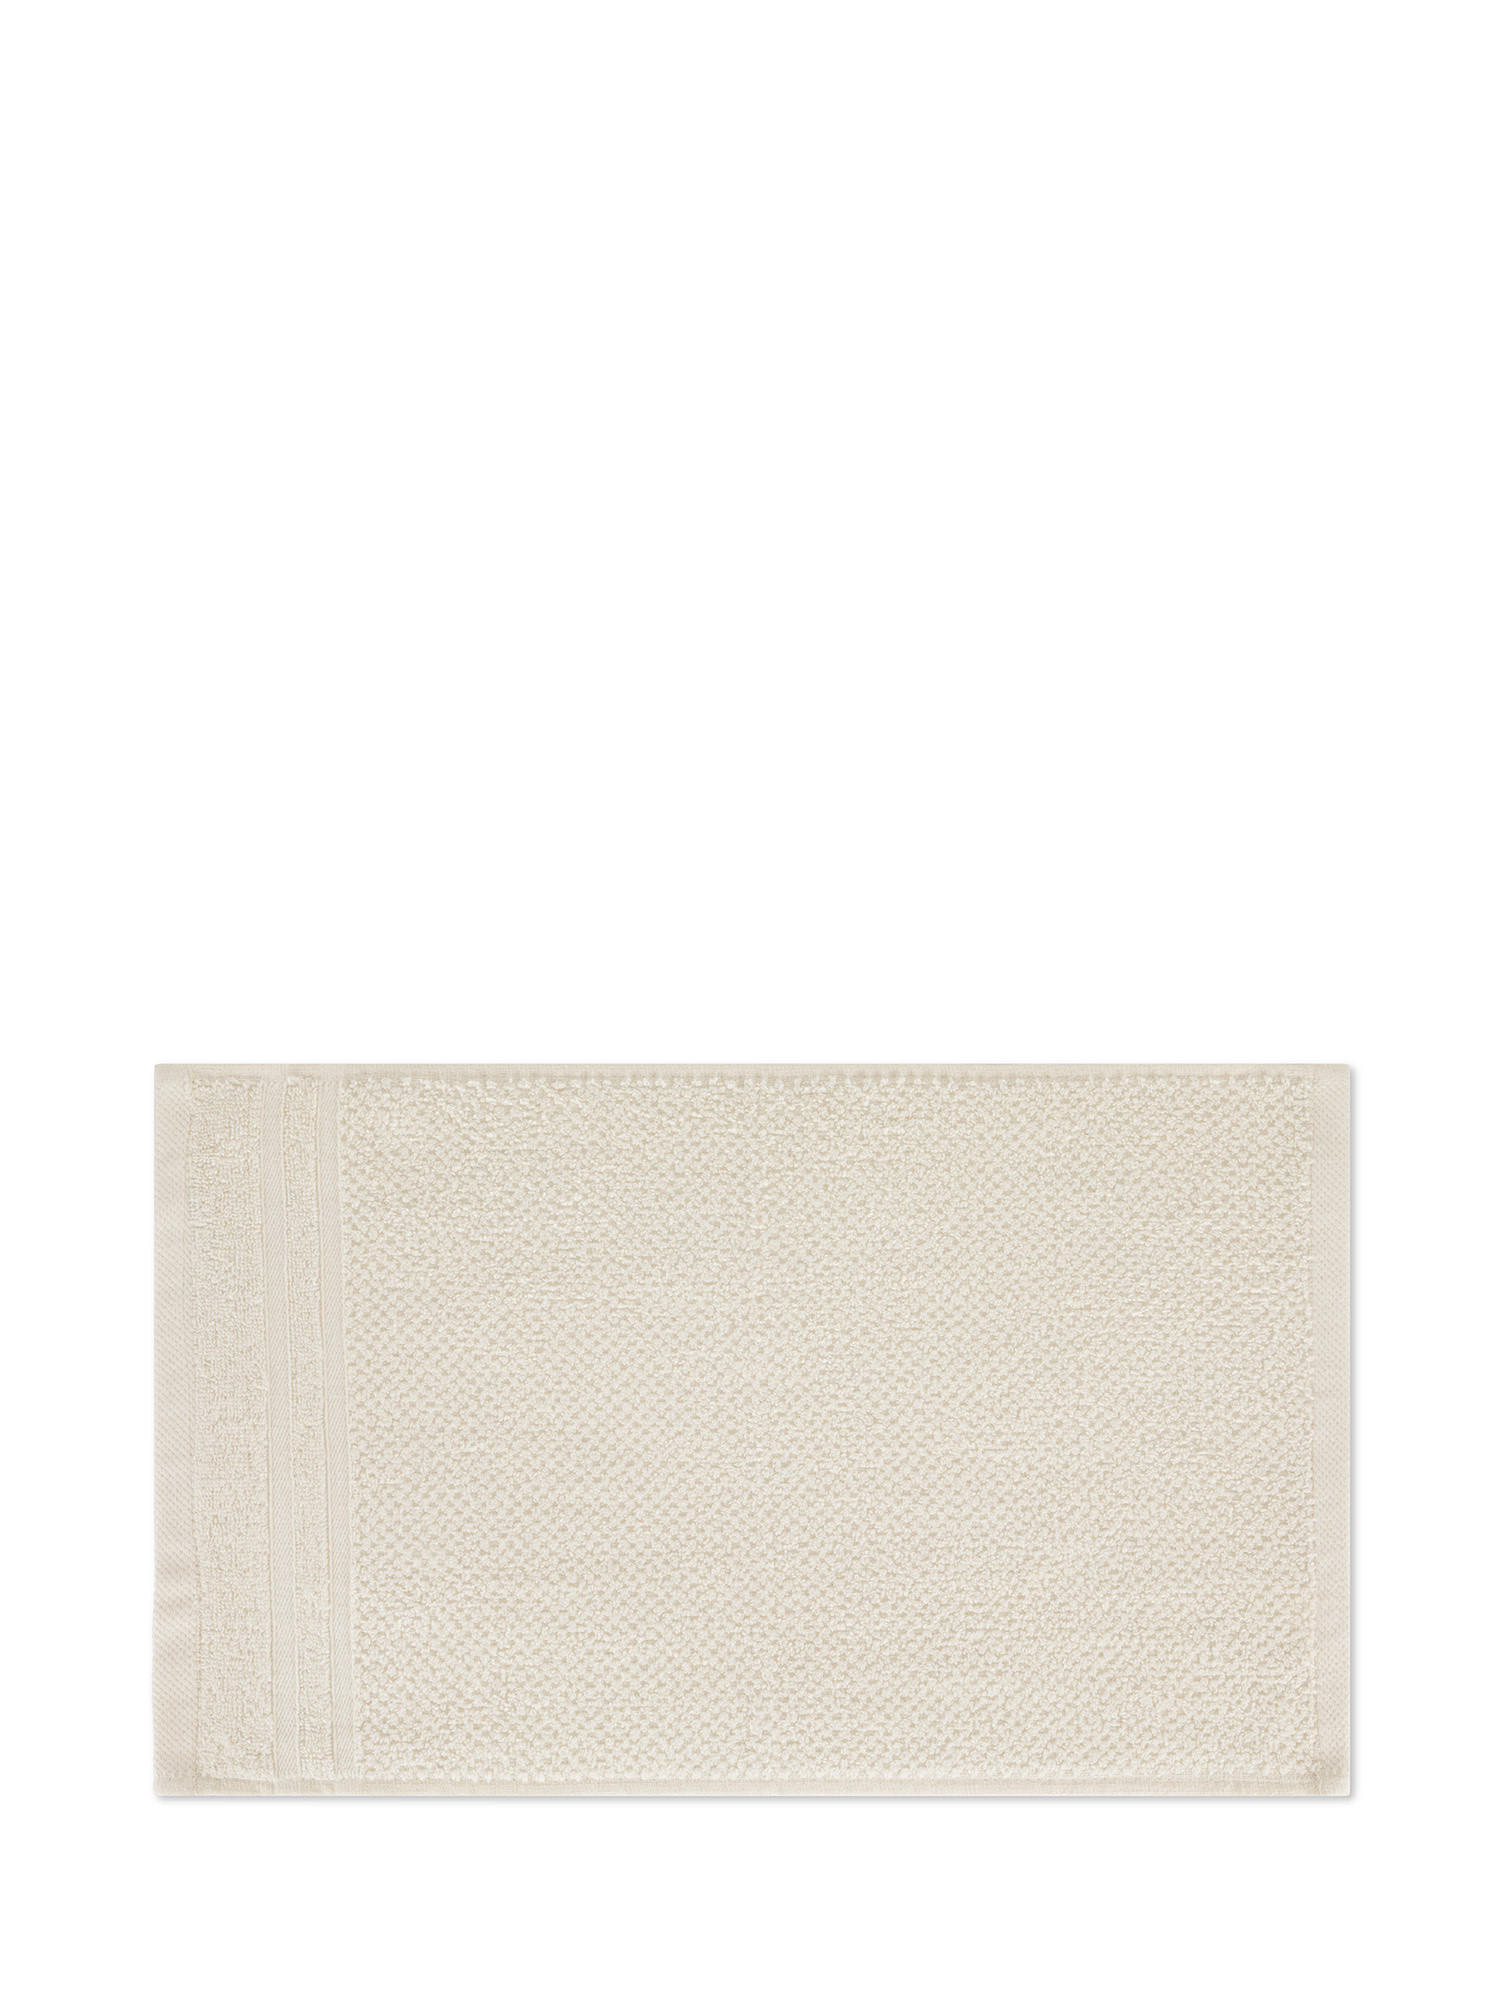 Set of 5 terry cotton towels, White, large image number 1